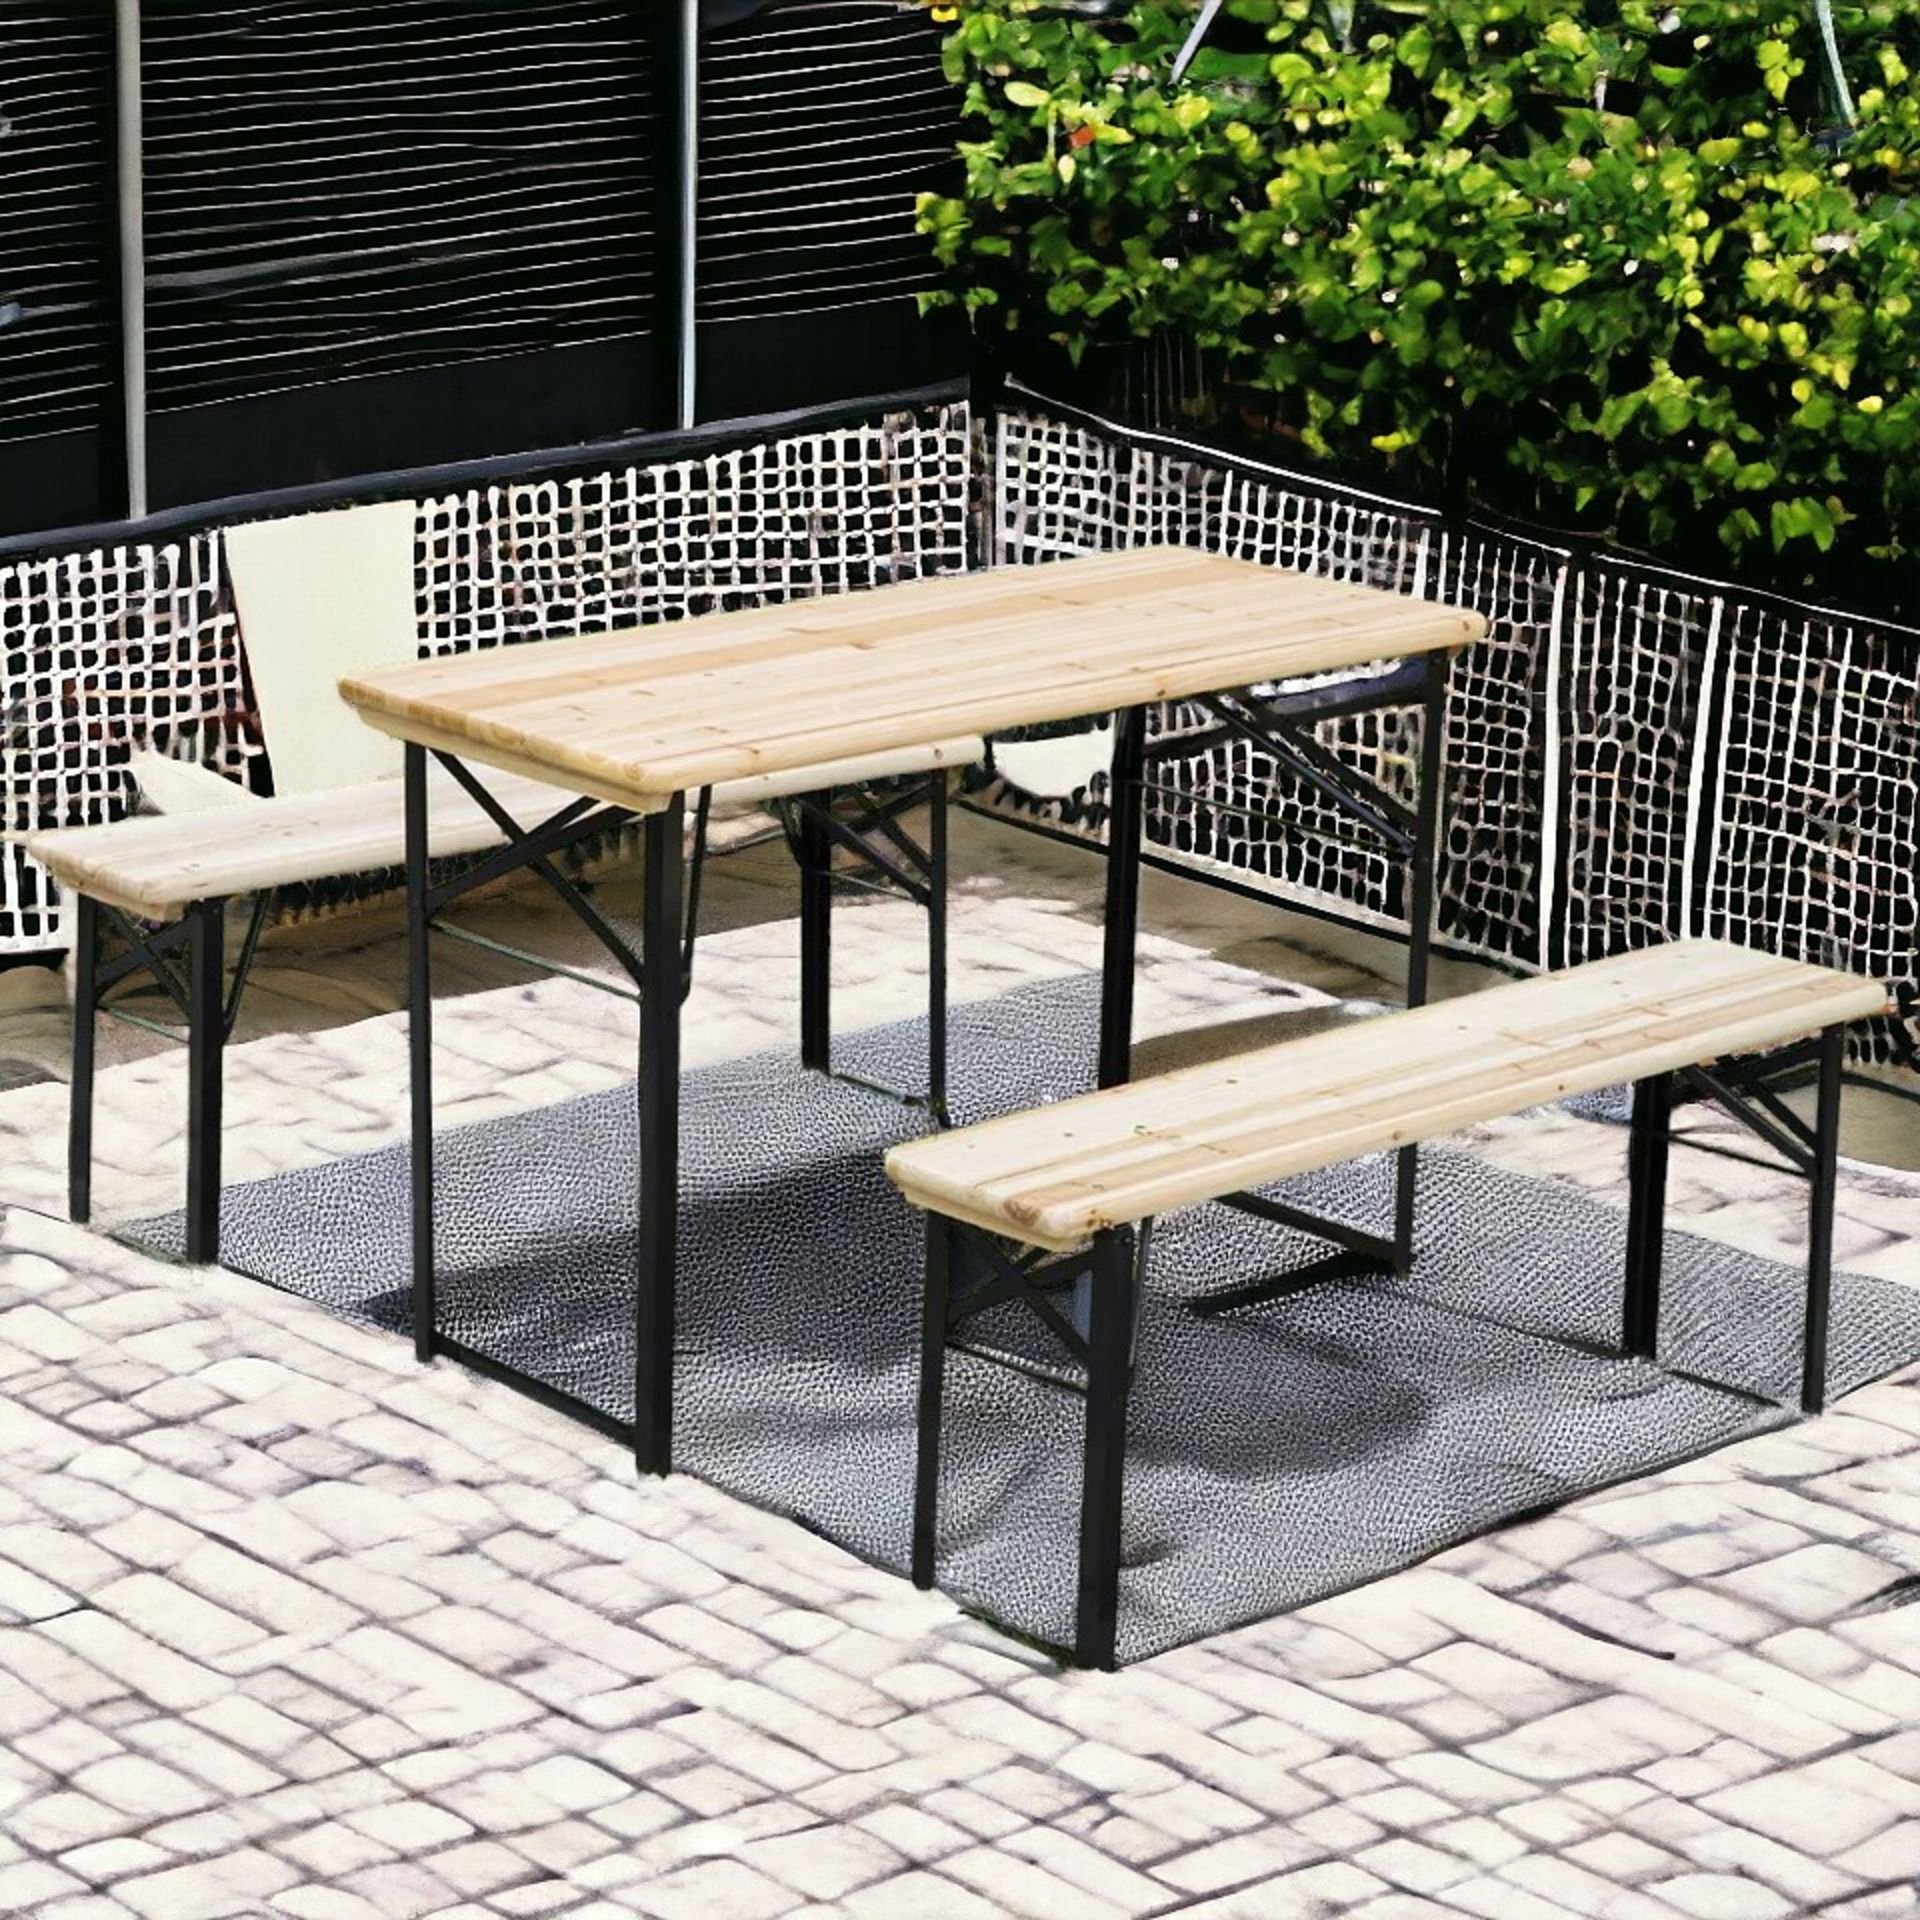 FREE DELIVERY - BRAND NEW OUTDOOR PICNIC TABLE PORTABLE FOLDING CAMPING PATIO BEER TABLE SET